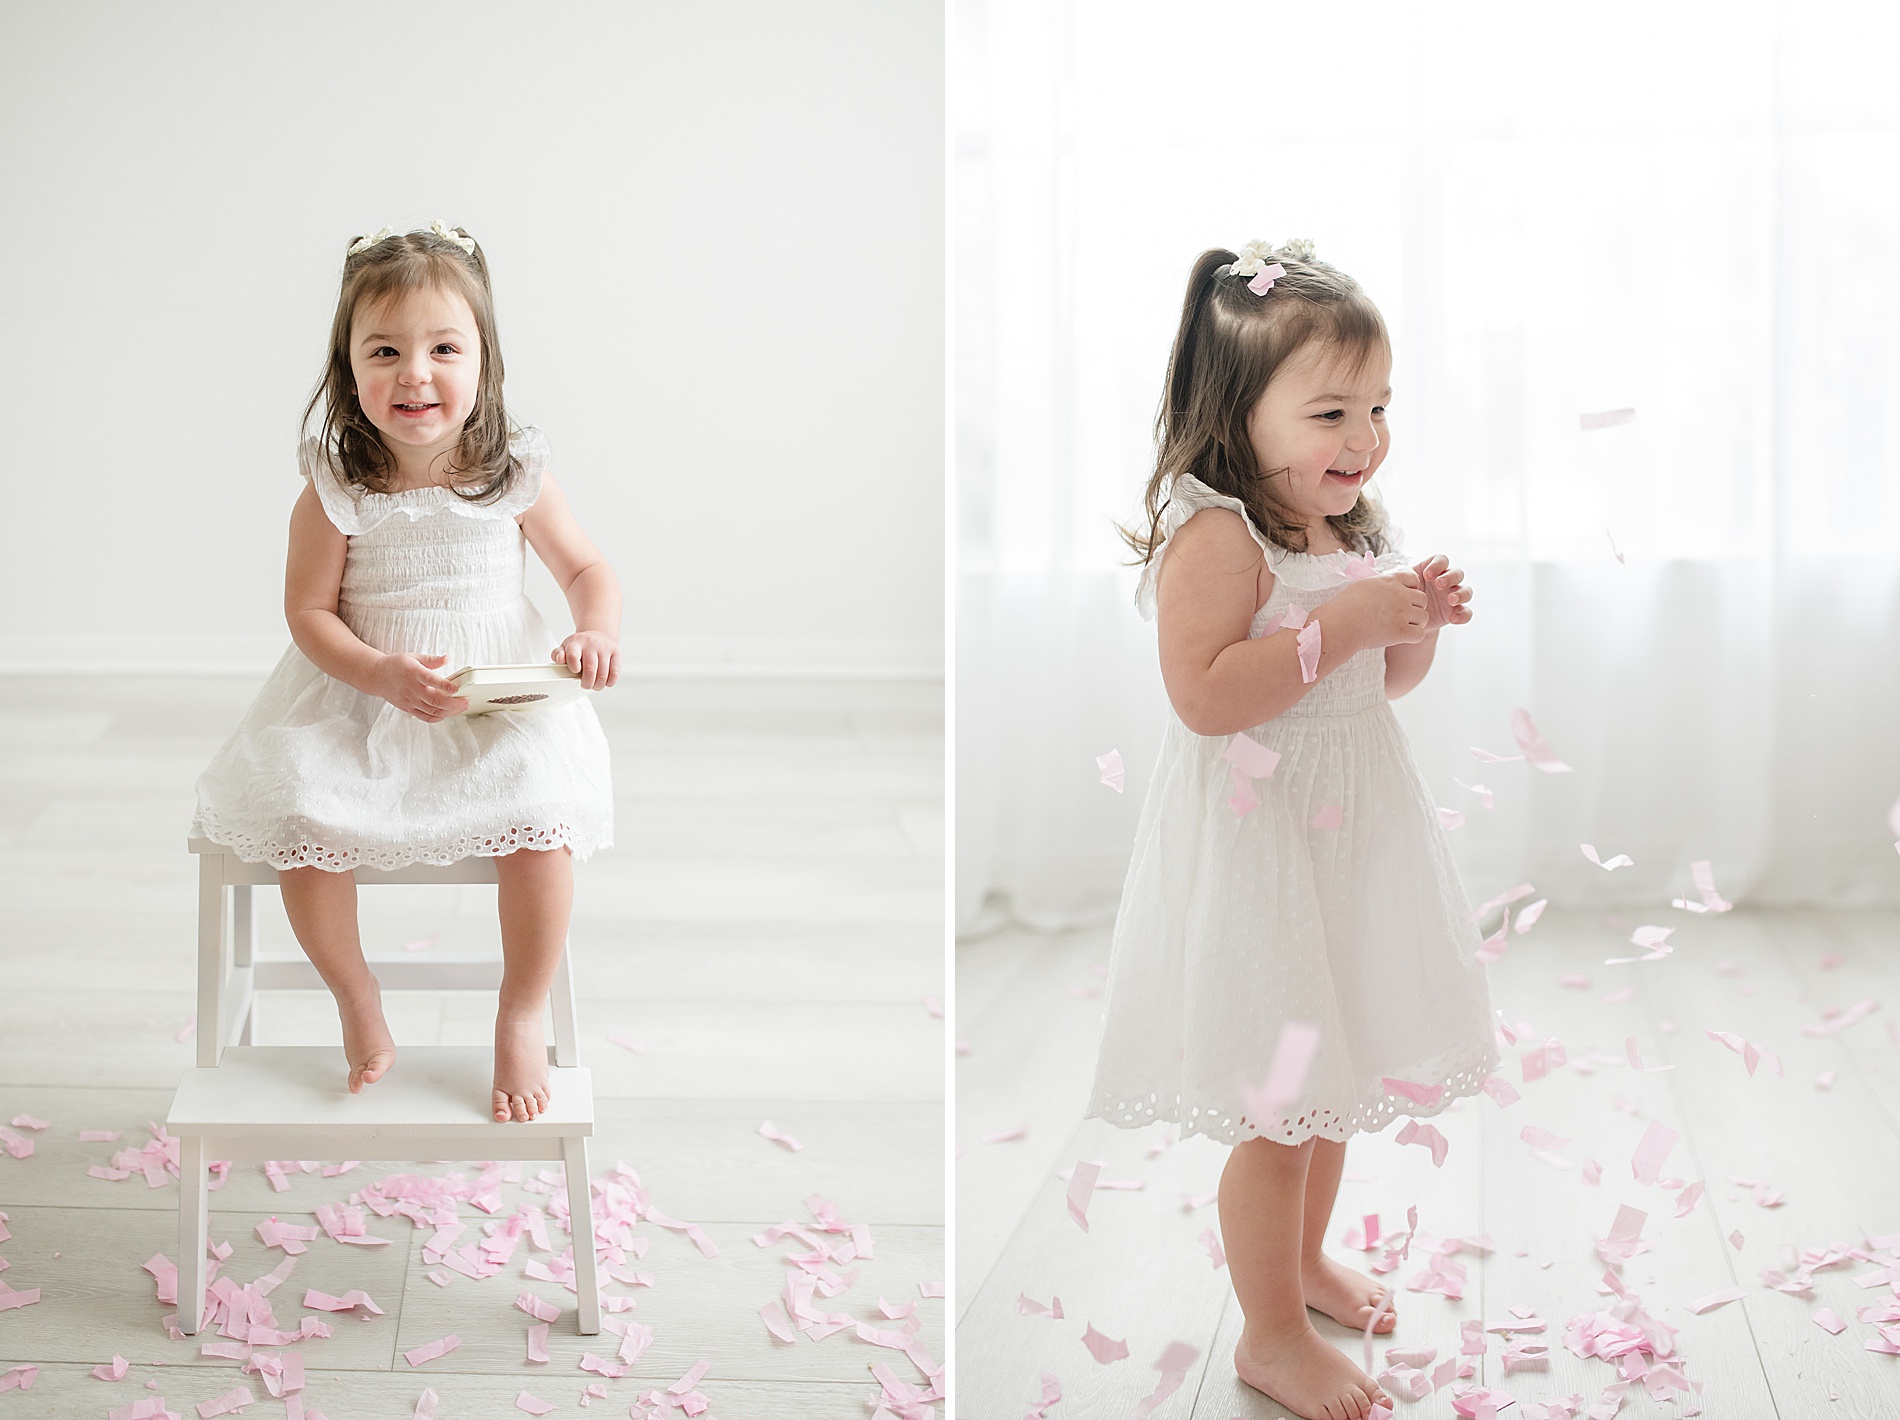 little girl plays in pink confetti from gender reveal photographed by Lindsey Dutton Photography, a Dallas Maternity photographer